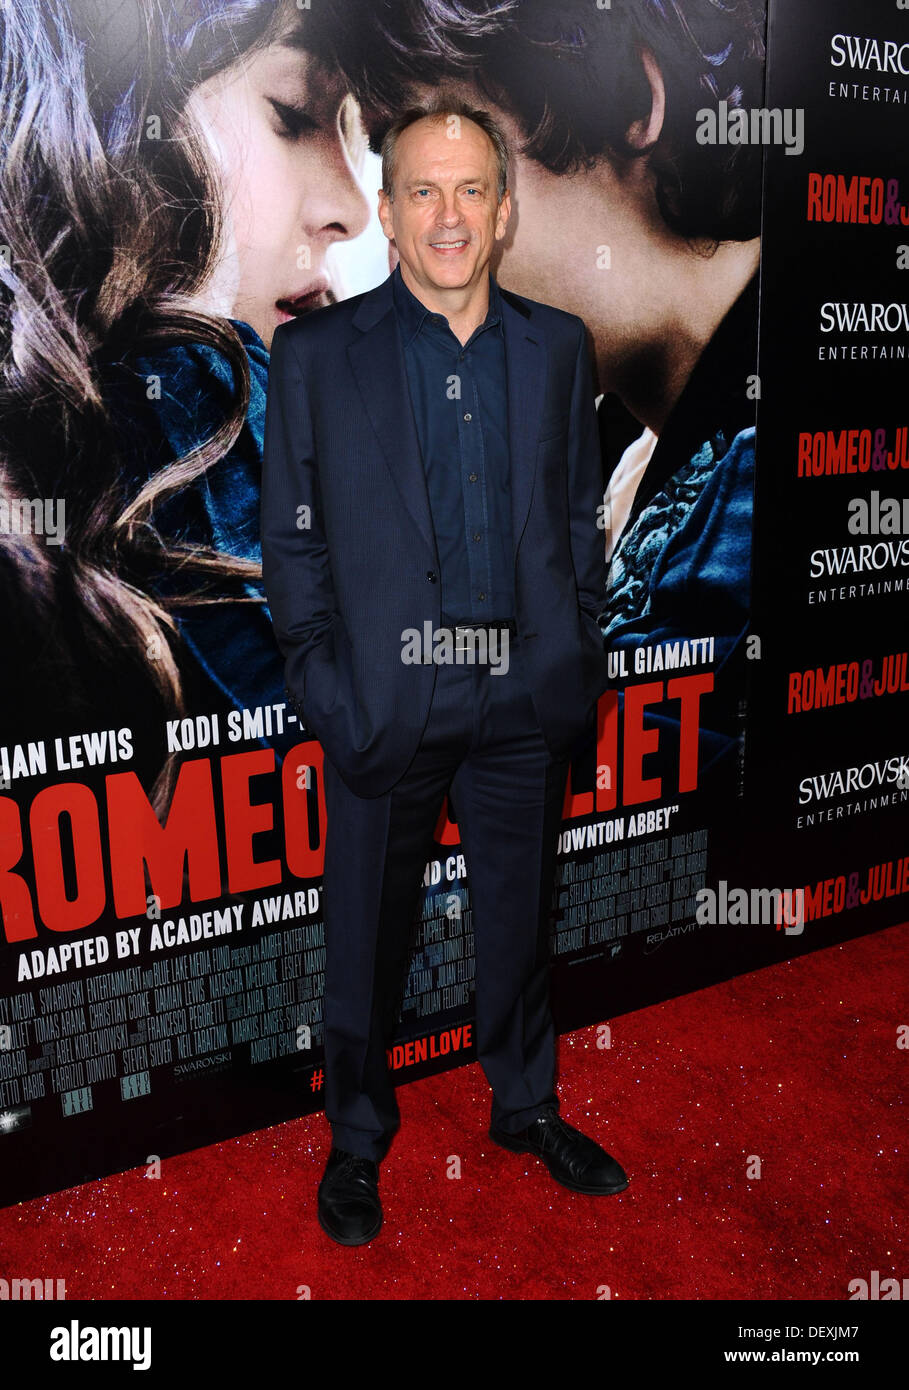 Los Angeles, California, USA. 24th Sep, 2013. Tomas Arana attending the Los Angeles Premiere of ''Romeo & Juliet'' held at the Arclight Theater in Hollywood, California on September 24, 2013. 2013 © D. Long/Globe Photos/ZUMAPRESS.com/Alamy Live News Stock Photo